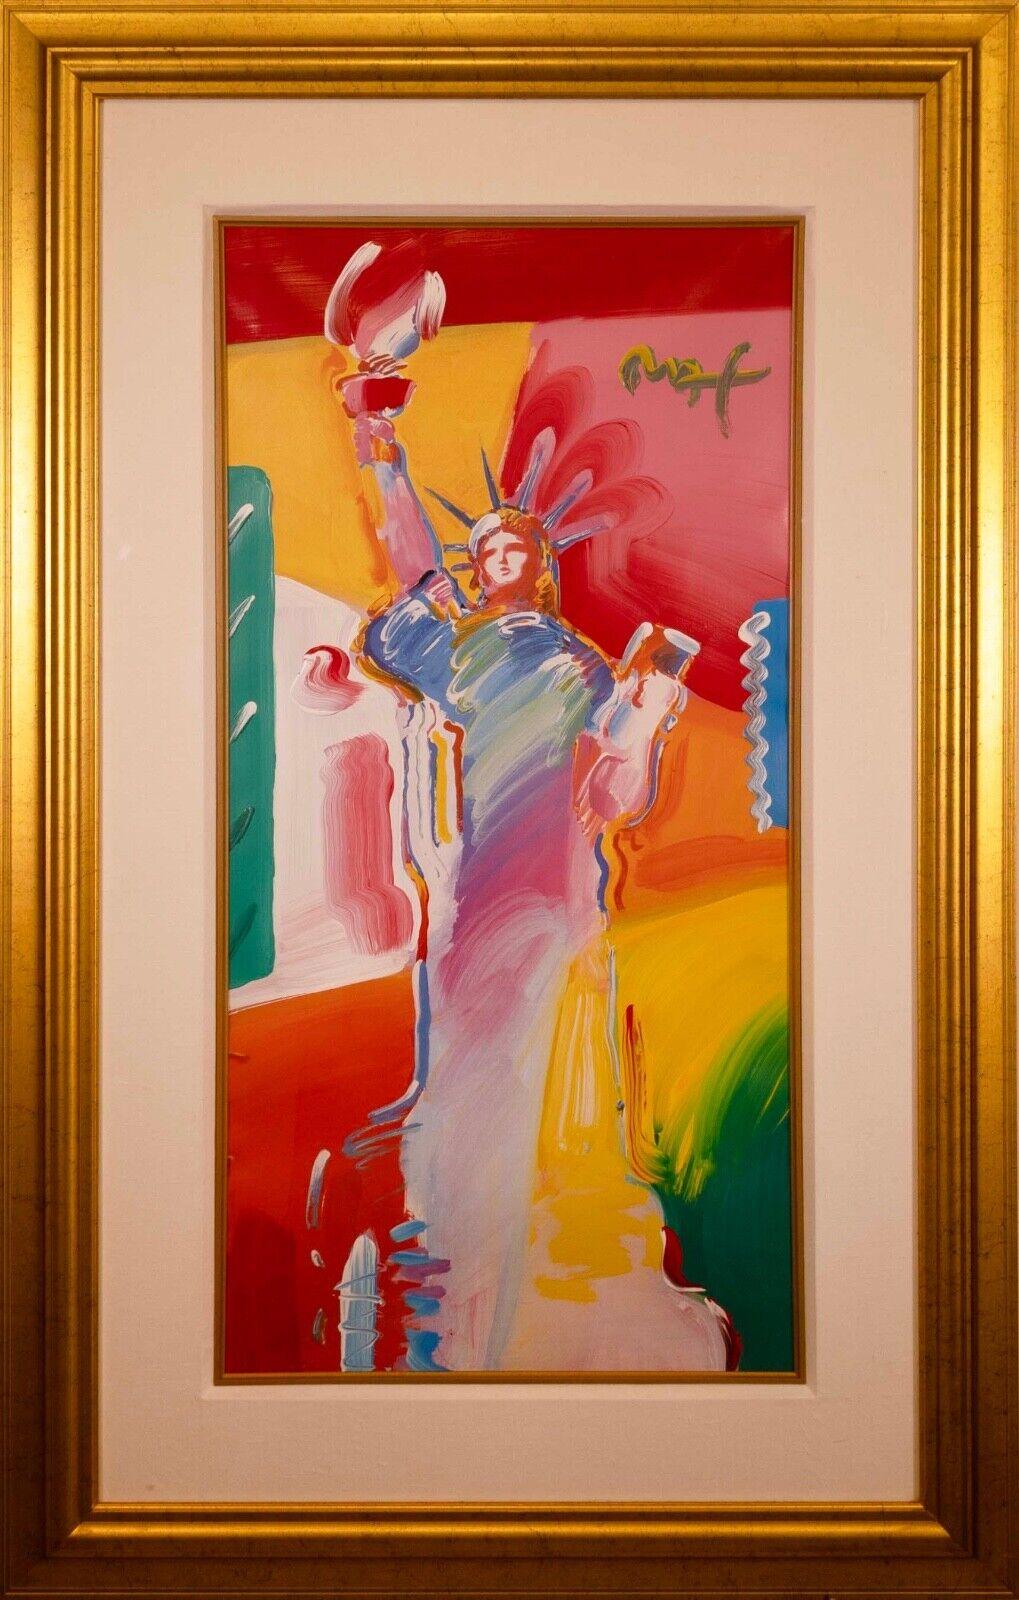 A monumental patriotic mixed-media lithography with acrylic painting on paper titled “State of Liberty” by famed artist Peter Max. Hand signed in acrylic by artist top right. Circa early 2000s. Honoring the country that Peter Max loves and